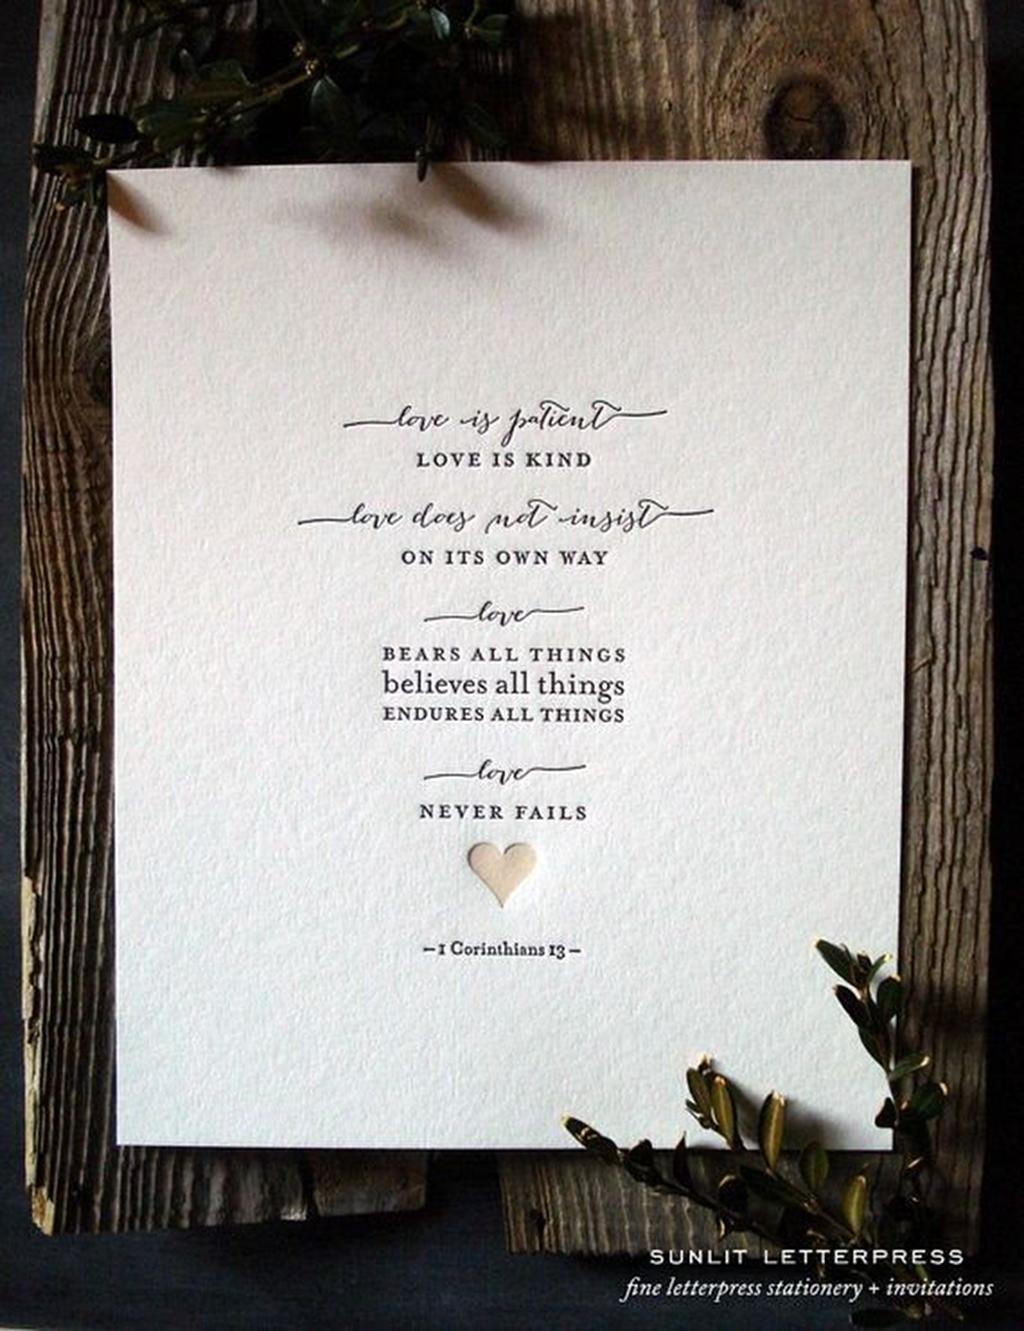 Marriage Quotes For Wedding Invitations From Bible Fresh 103